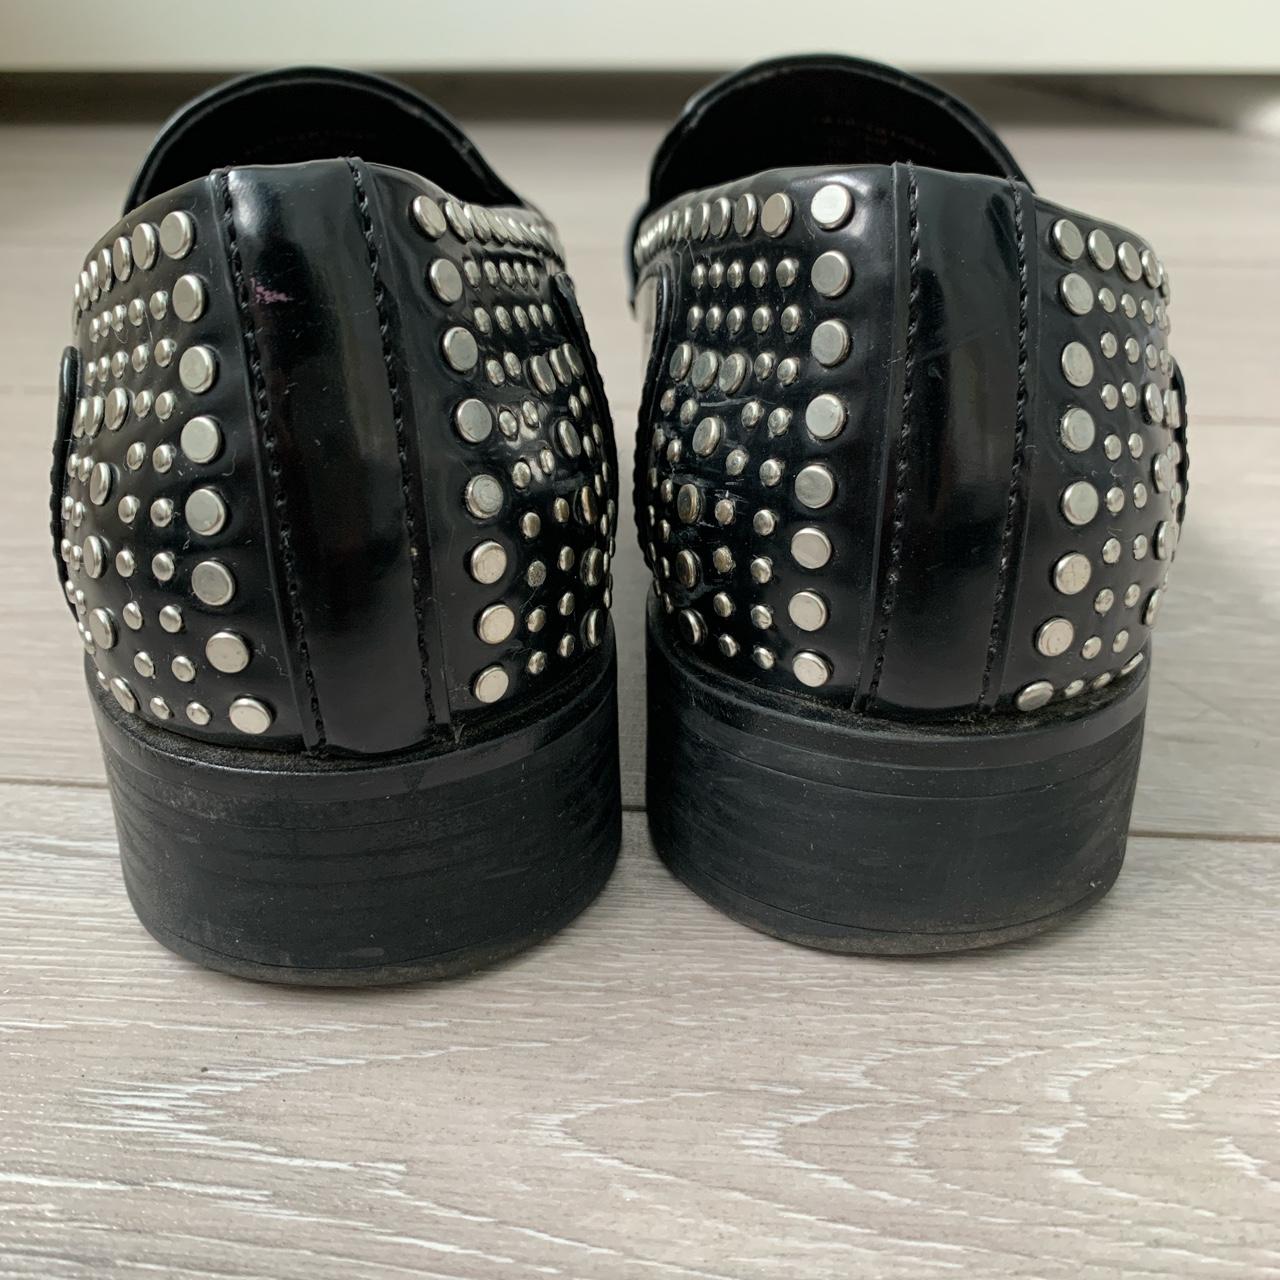 🔥ZARA TRAFALUC studded loafers🔥 Edgy loafers with... - Depop